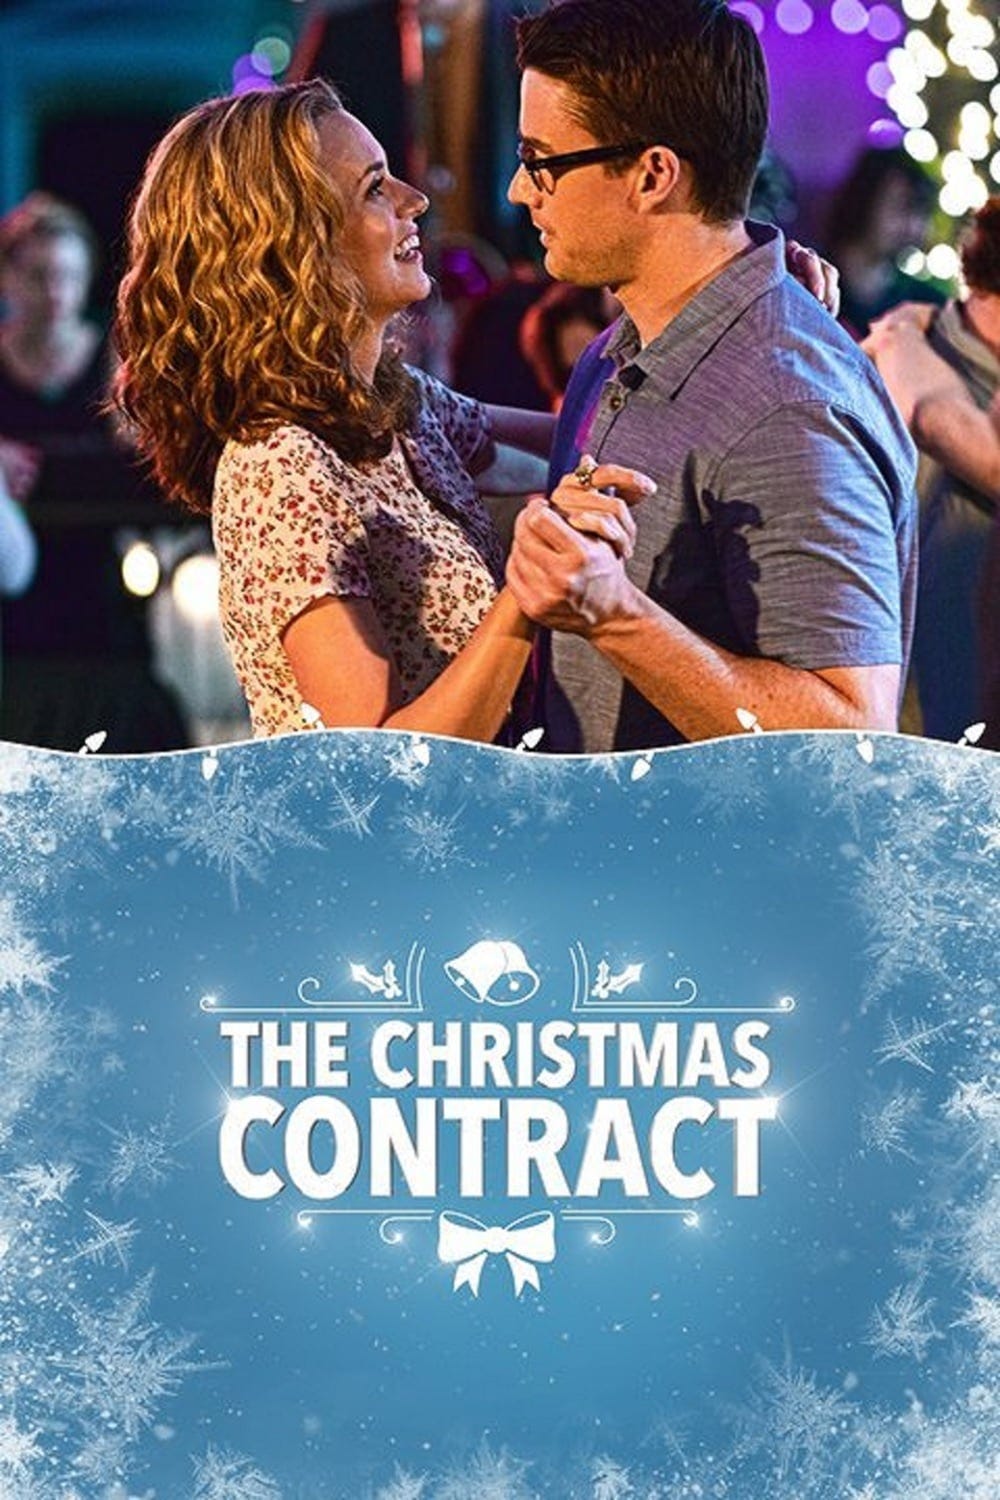 the christmas contract 2020 Streamcloud Film The Christmas Contract 2018 Ganzer Hd 2020 Online Komplett By Thatgamergi Aug 2020 Medium the christmas contract 2020